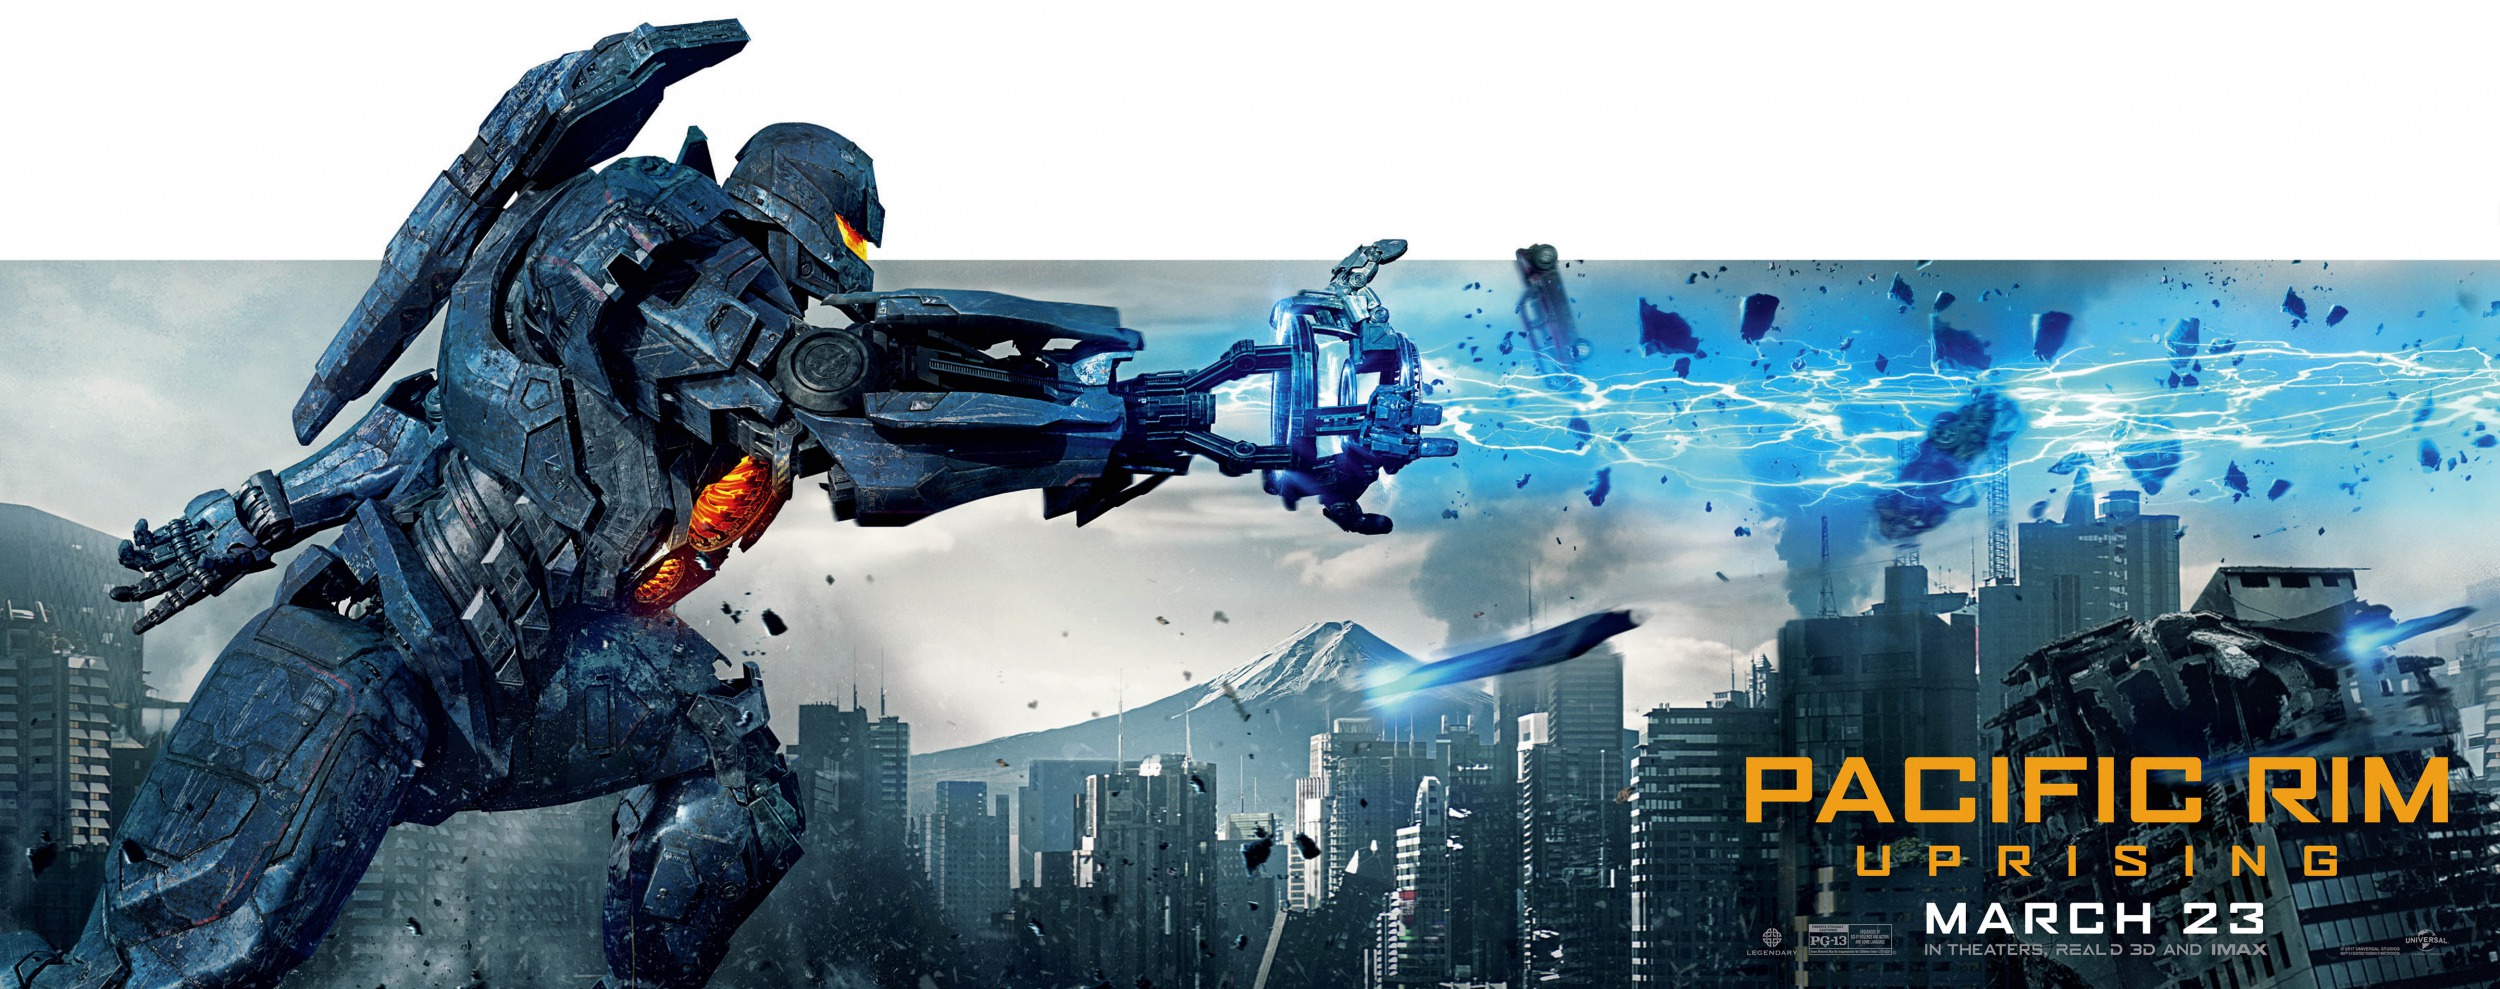 Mega Sized Movie Poster Image for Pacific Rim Uprising (#30 of 49)